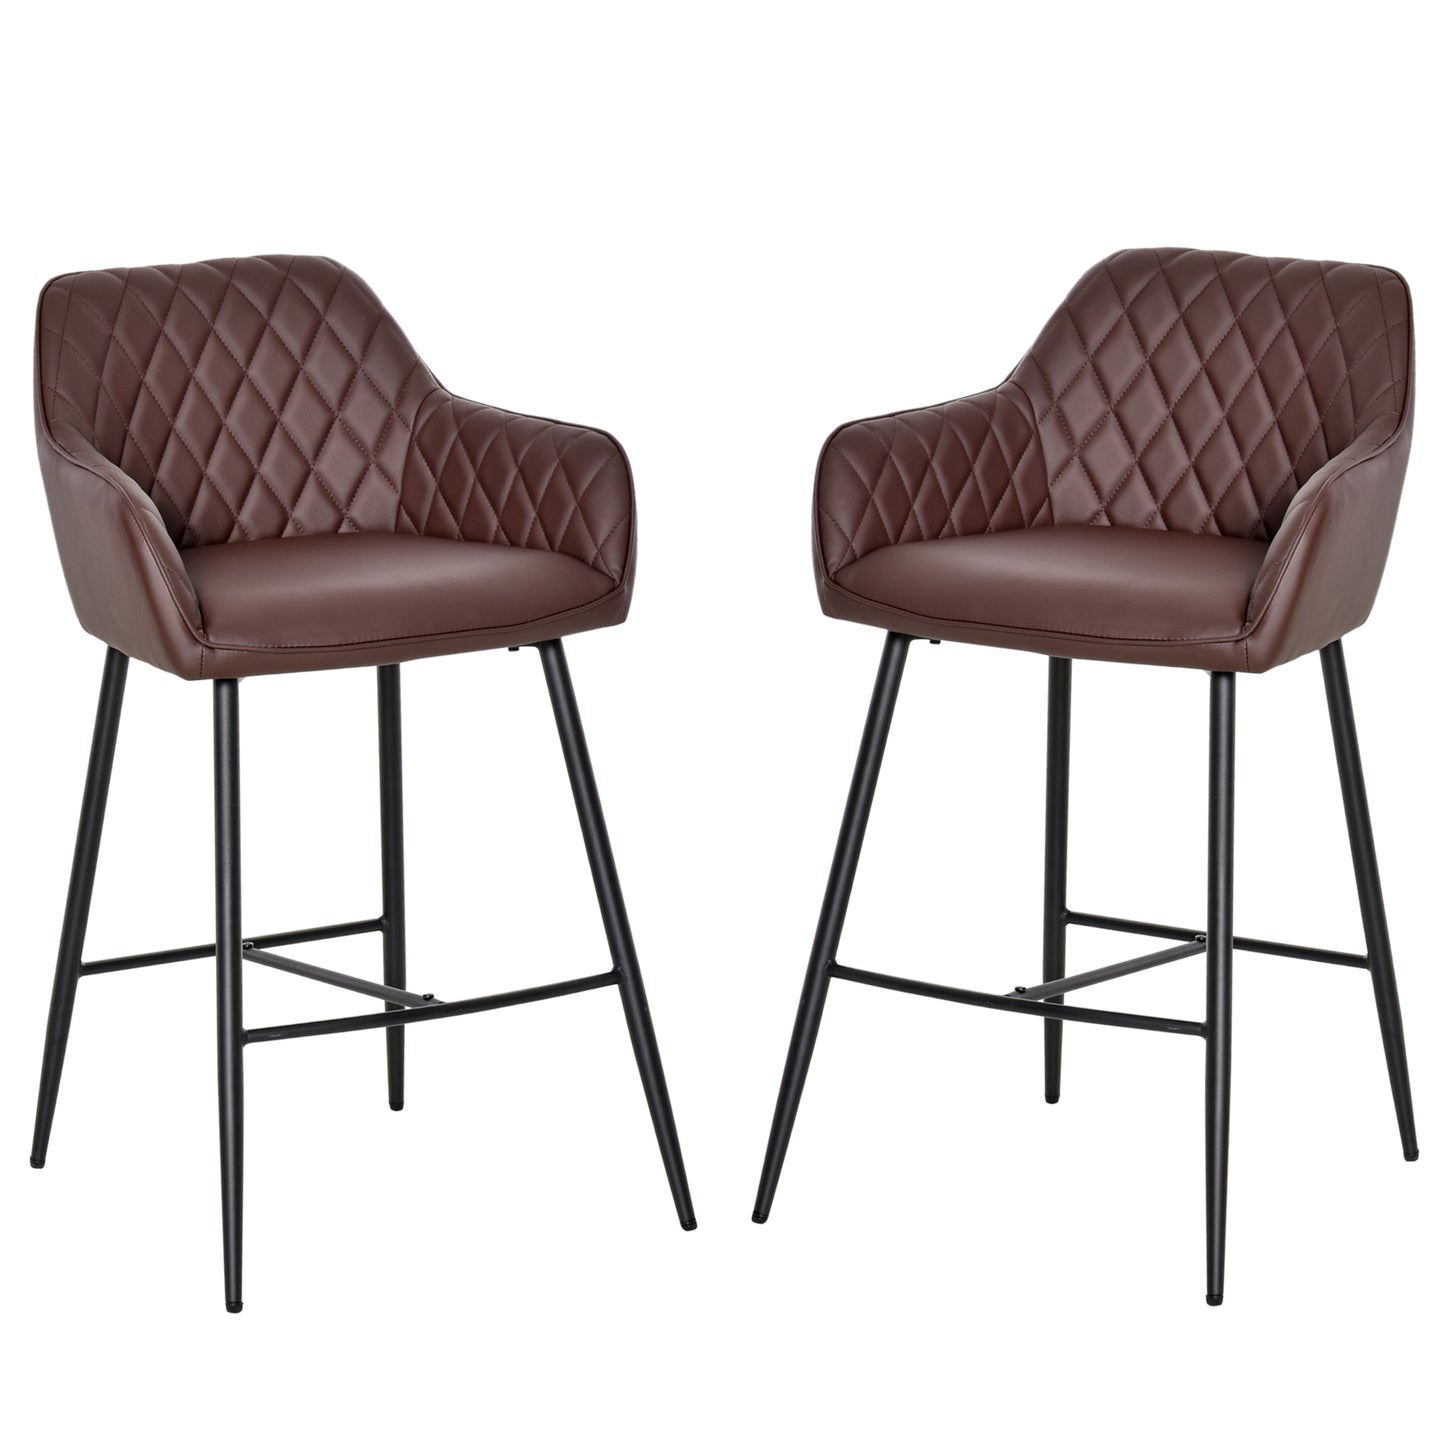 HOMCOM Industrial Style Bar Chairs Set of 2 with Footrest Solid Frame PU